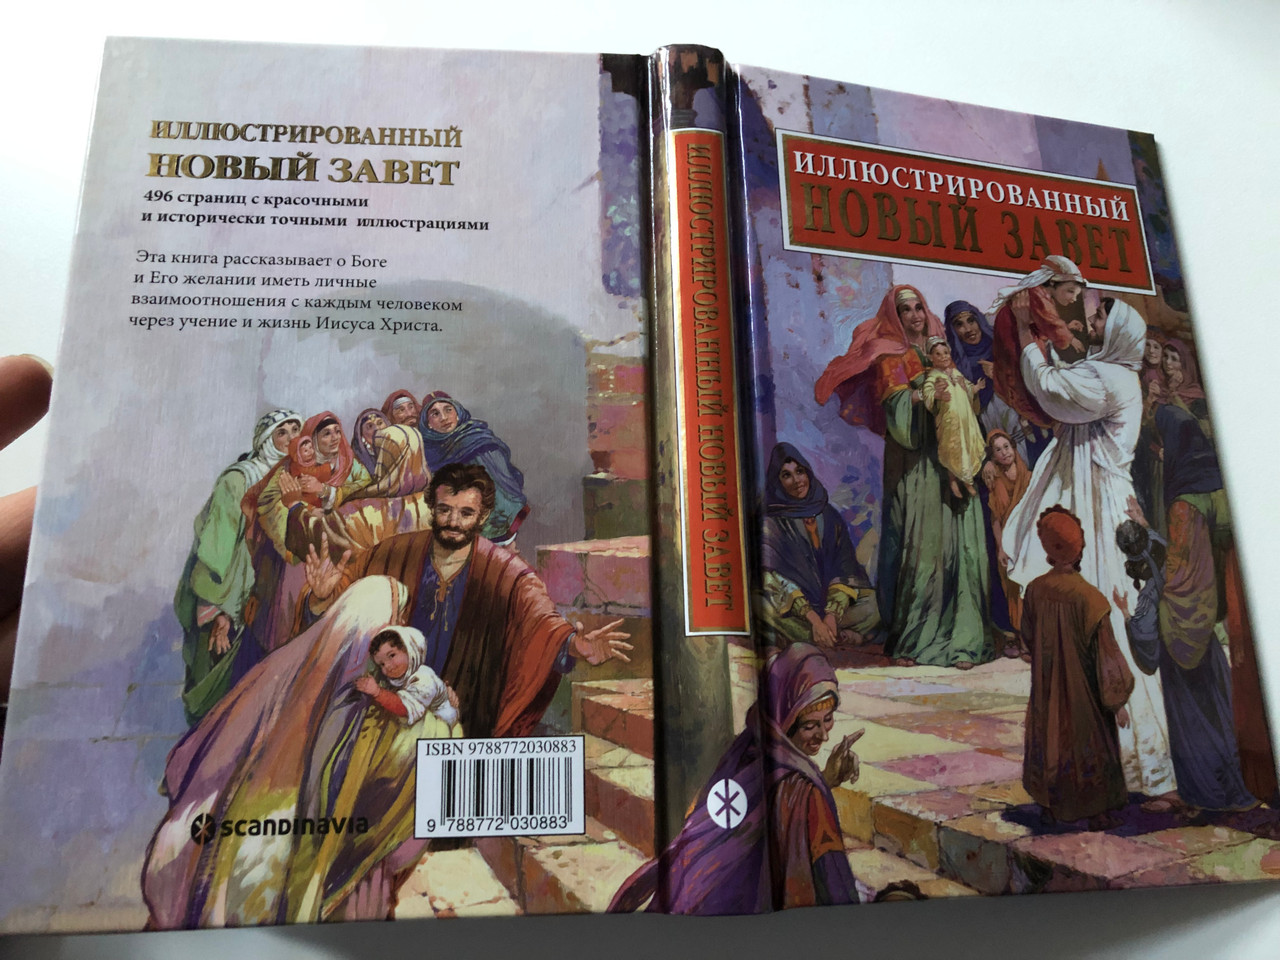 https://cdn10.bigcommerce.com/s-62bdpkt7pb/products/51203/images/260737/Russian_edition_of_The_Illustrated_New_Testament_12__98696.1670931838.1280.1280.JPG?c=2